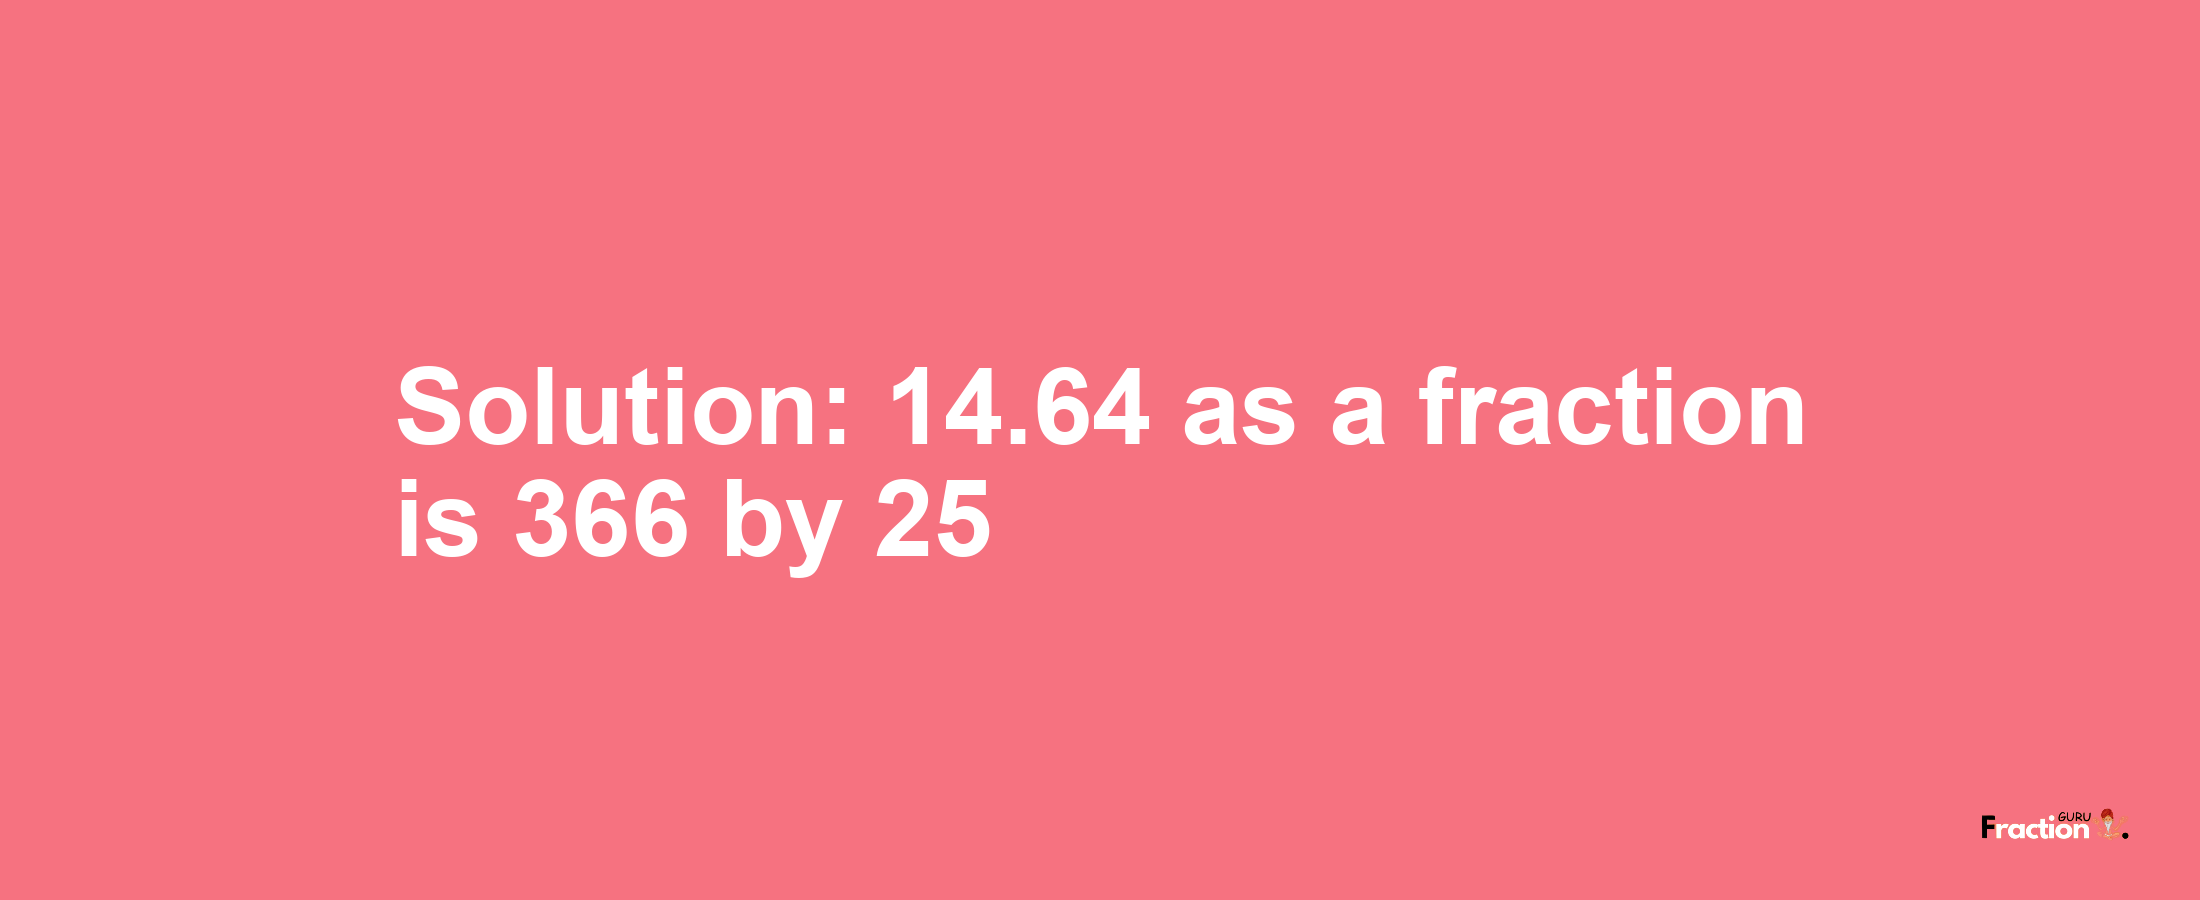 Solution:14.64 as a fraction is 366/25